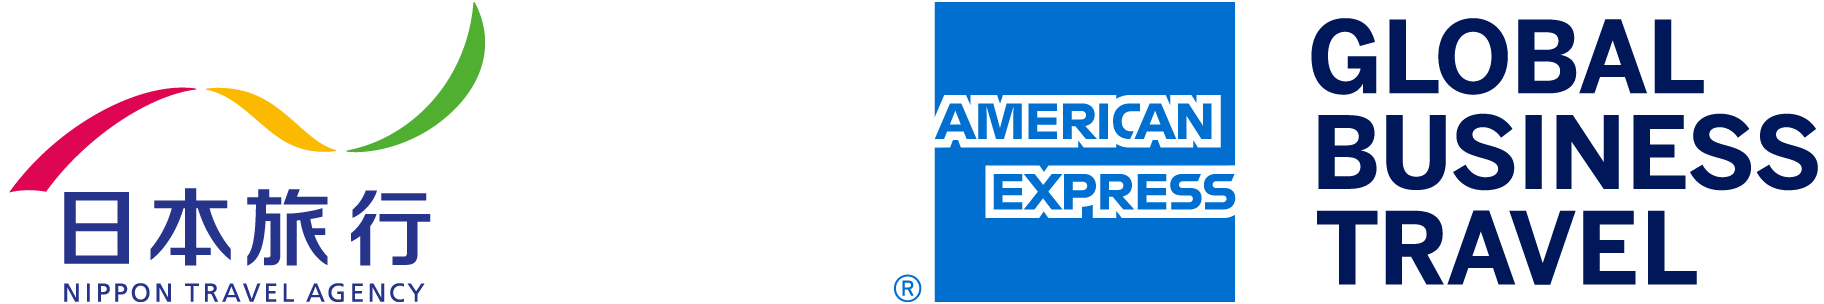 american express global business travel contact phone number